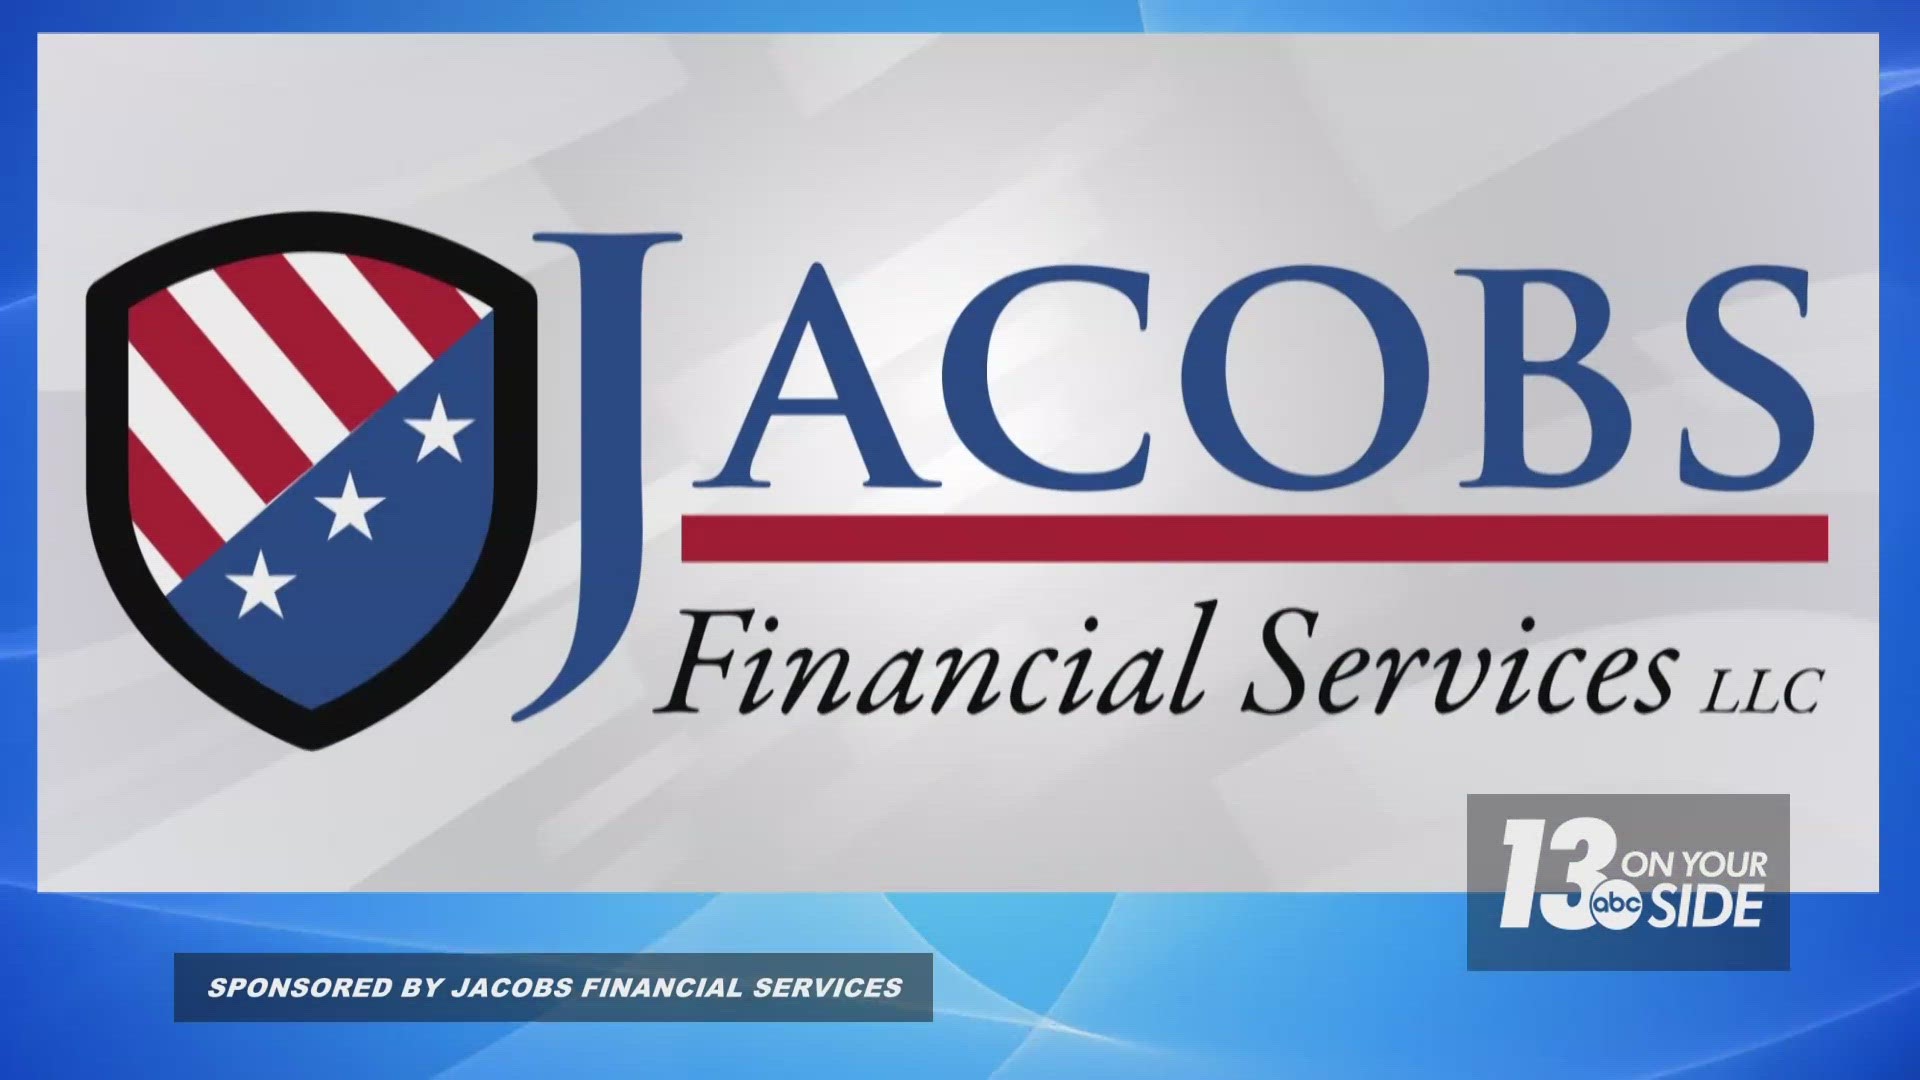 Tom Jacobs has helped thousands of people make their retirement dream a reality and he joined us from Jacobs Financial Services to talk about the process.